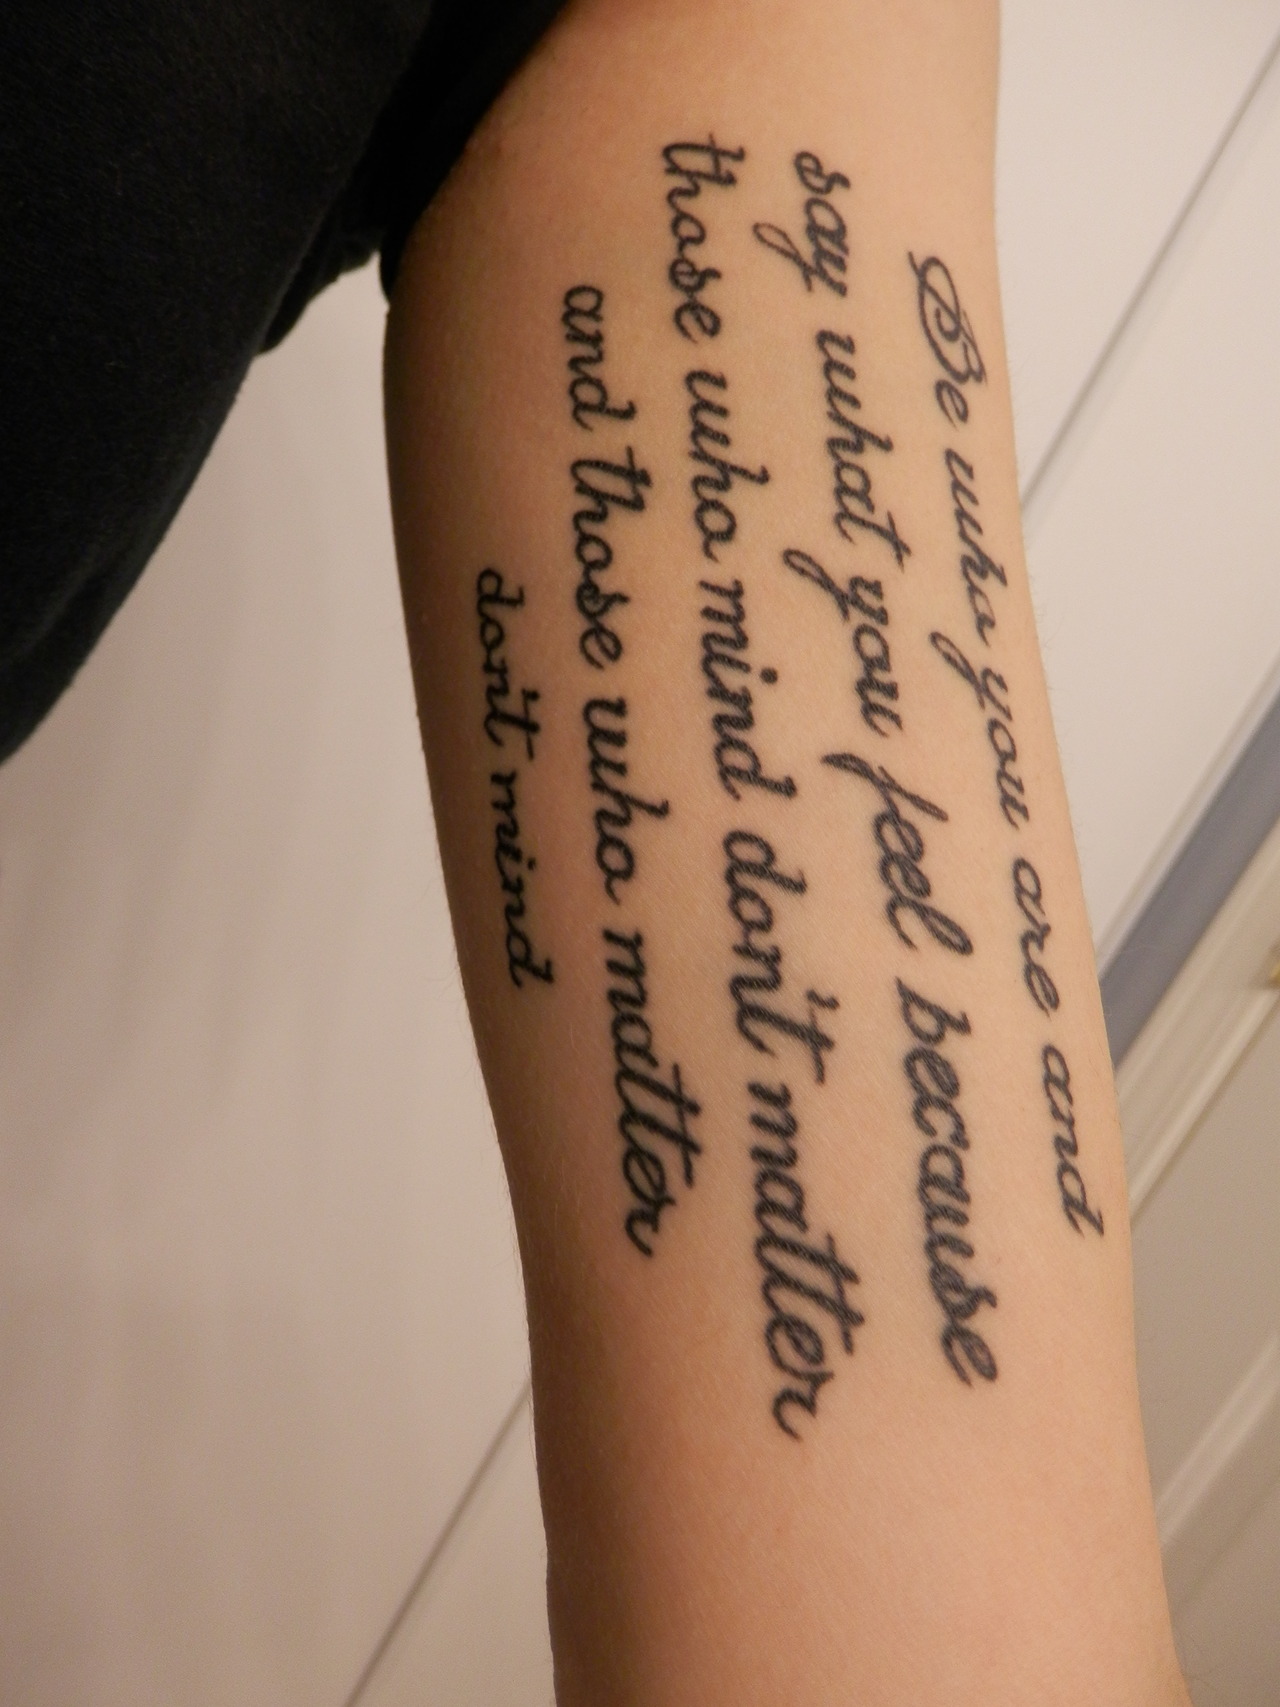 Quote Tattoos Designs Ideas and Meaning Tattoos For You